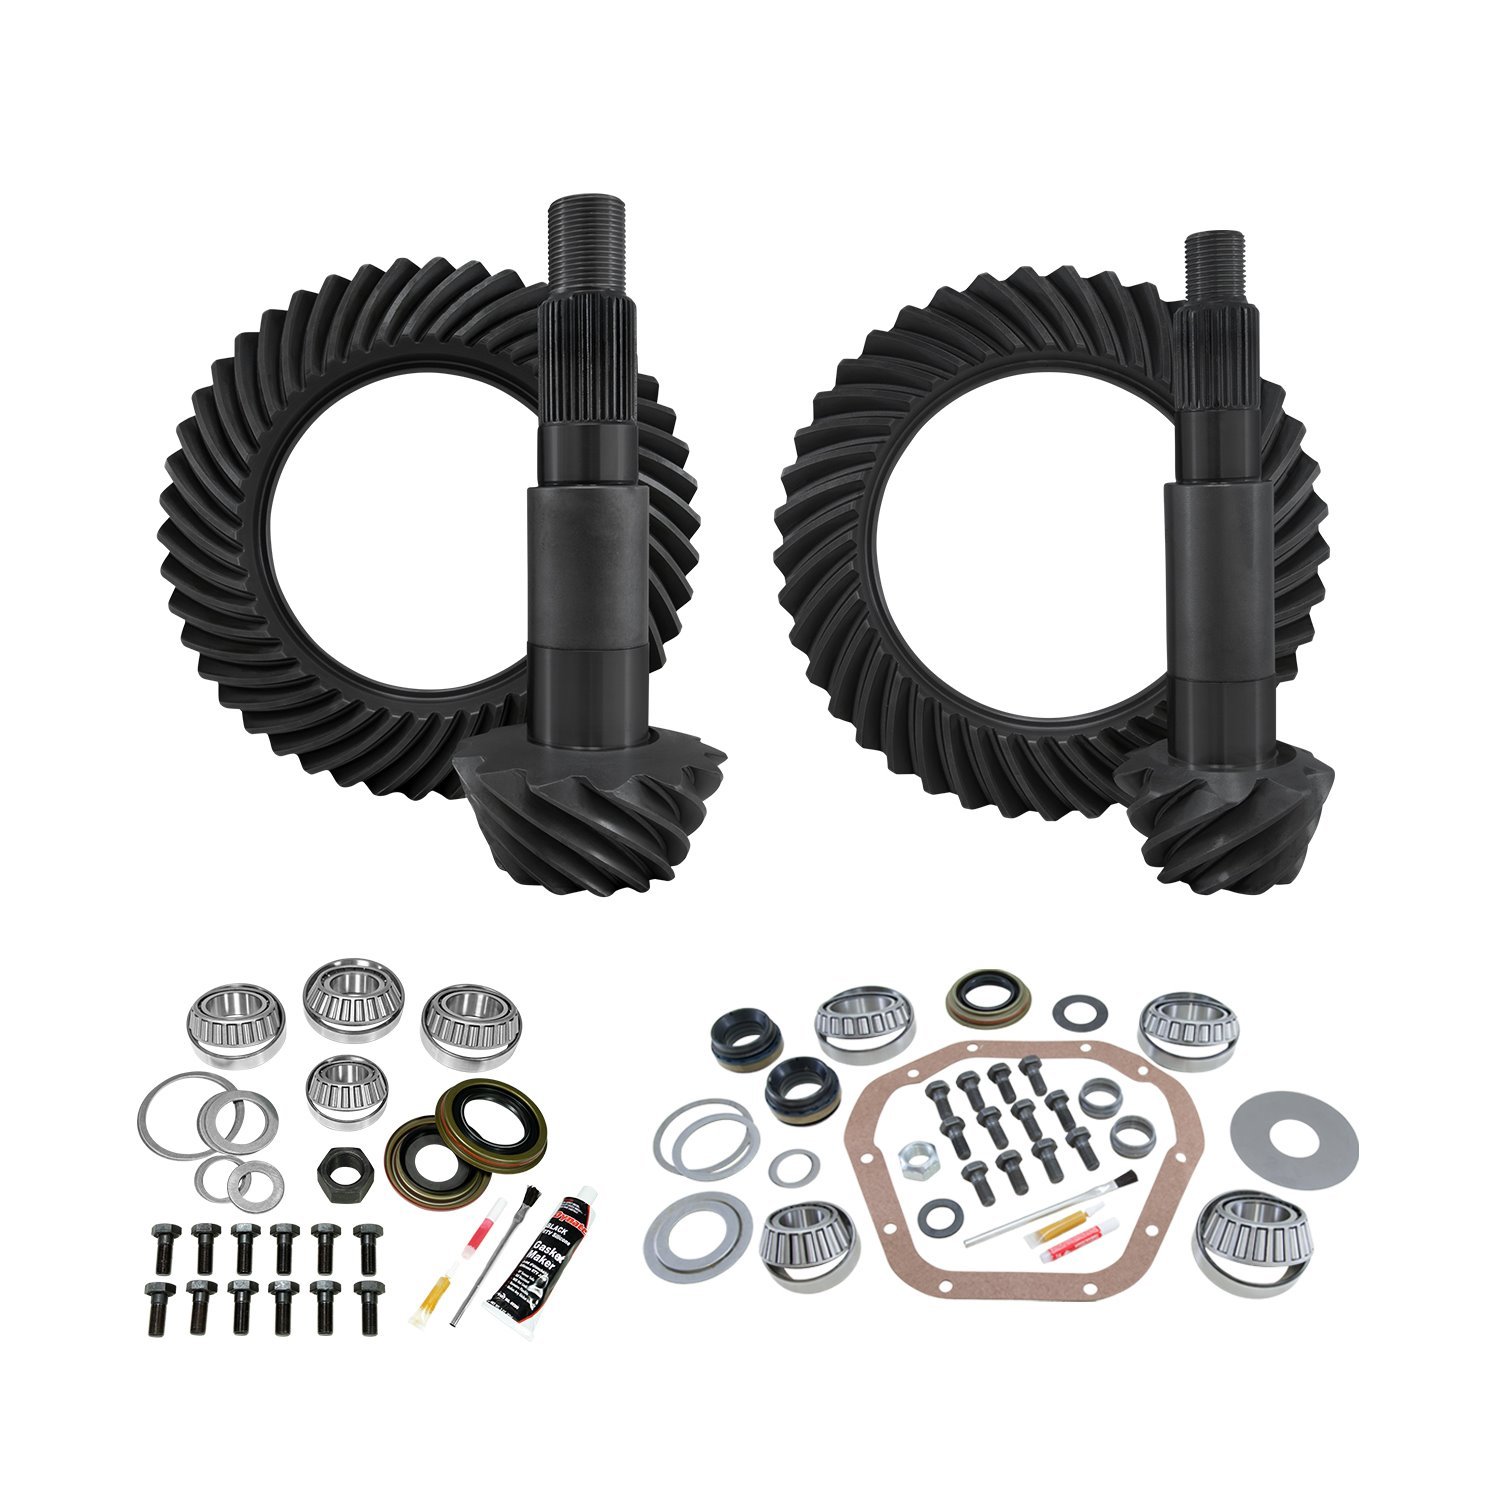 Re-Gear & Install Kit, D60 Reverse/Thick Front, D80 Rear, Ford F350, 5.38